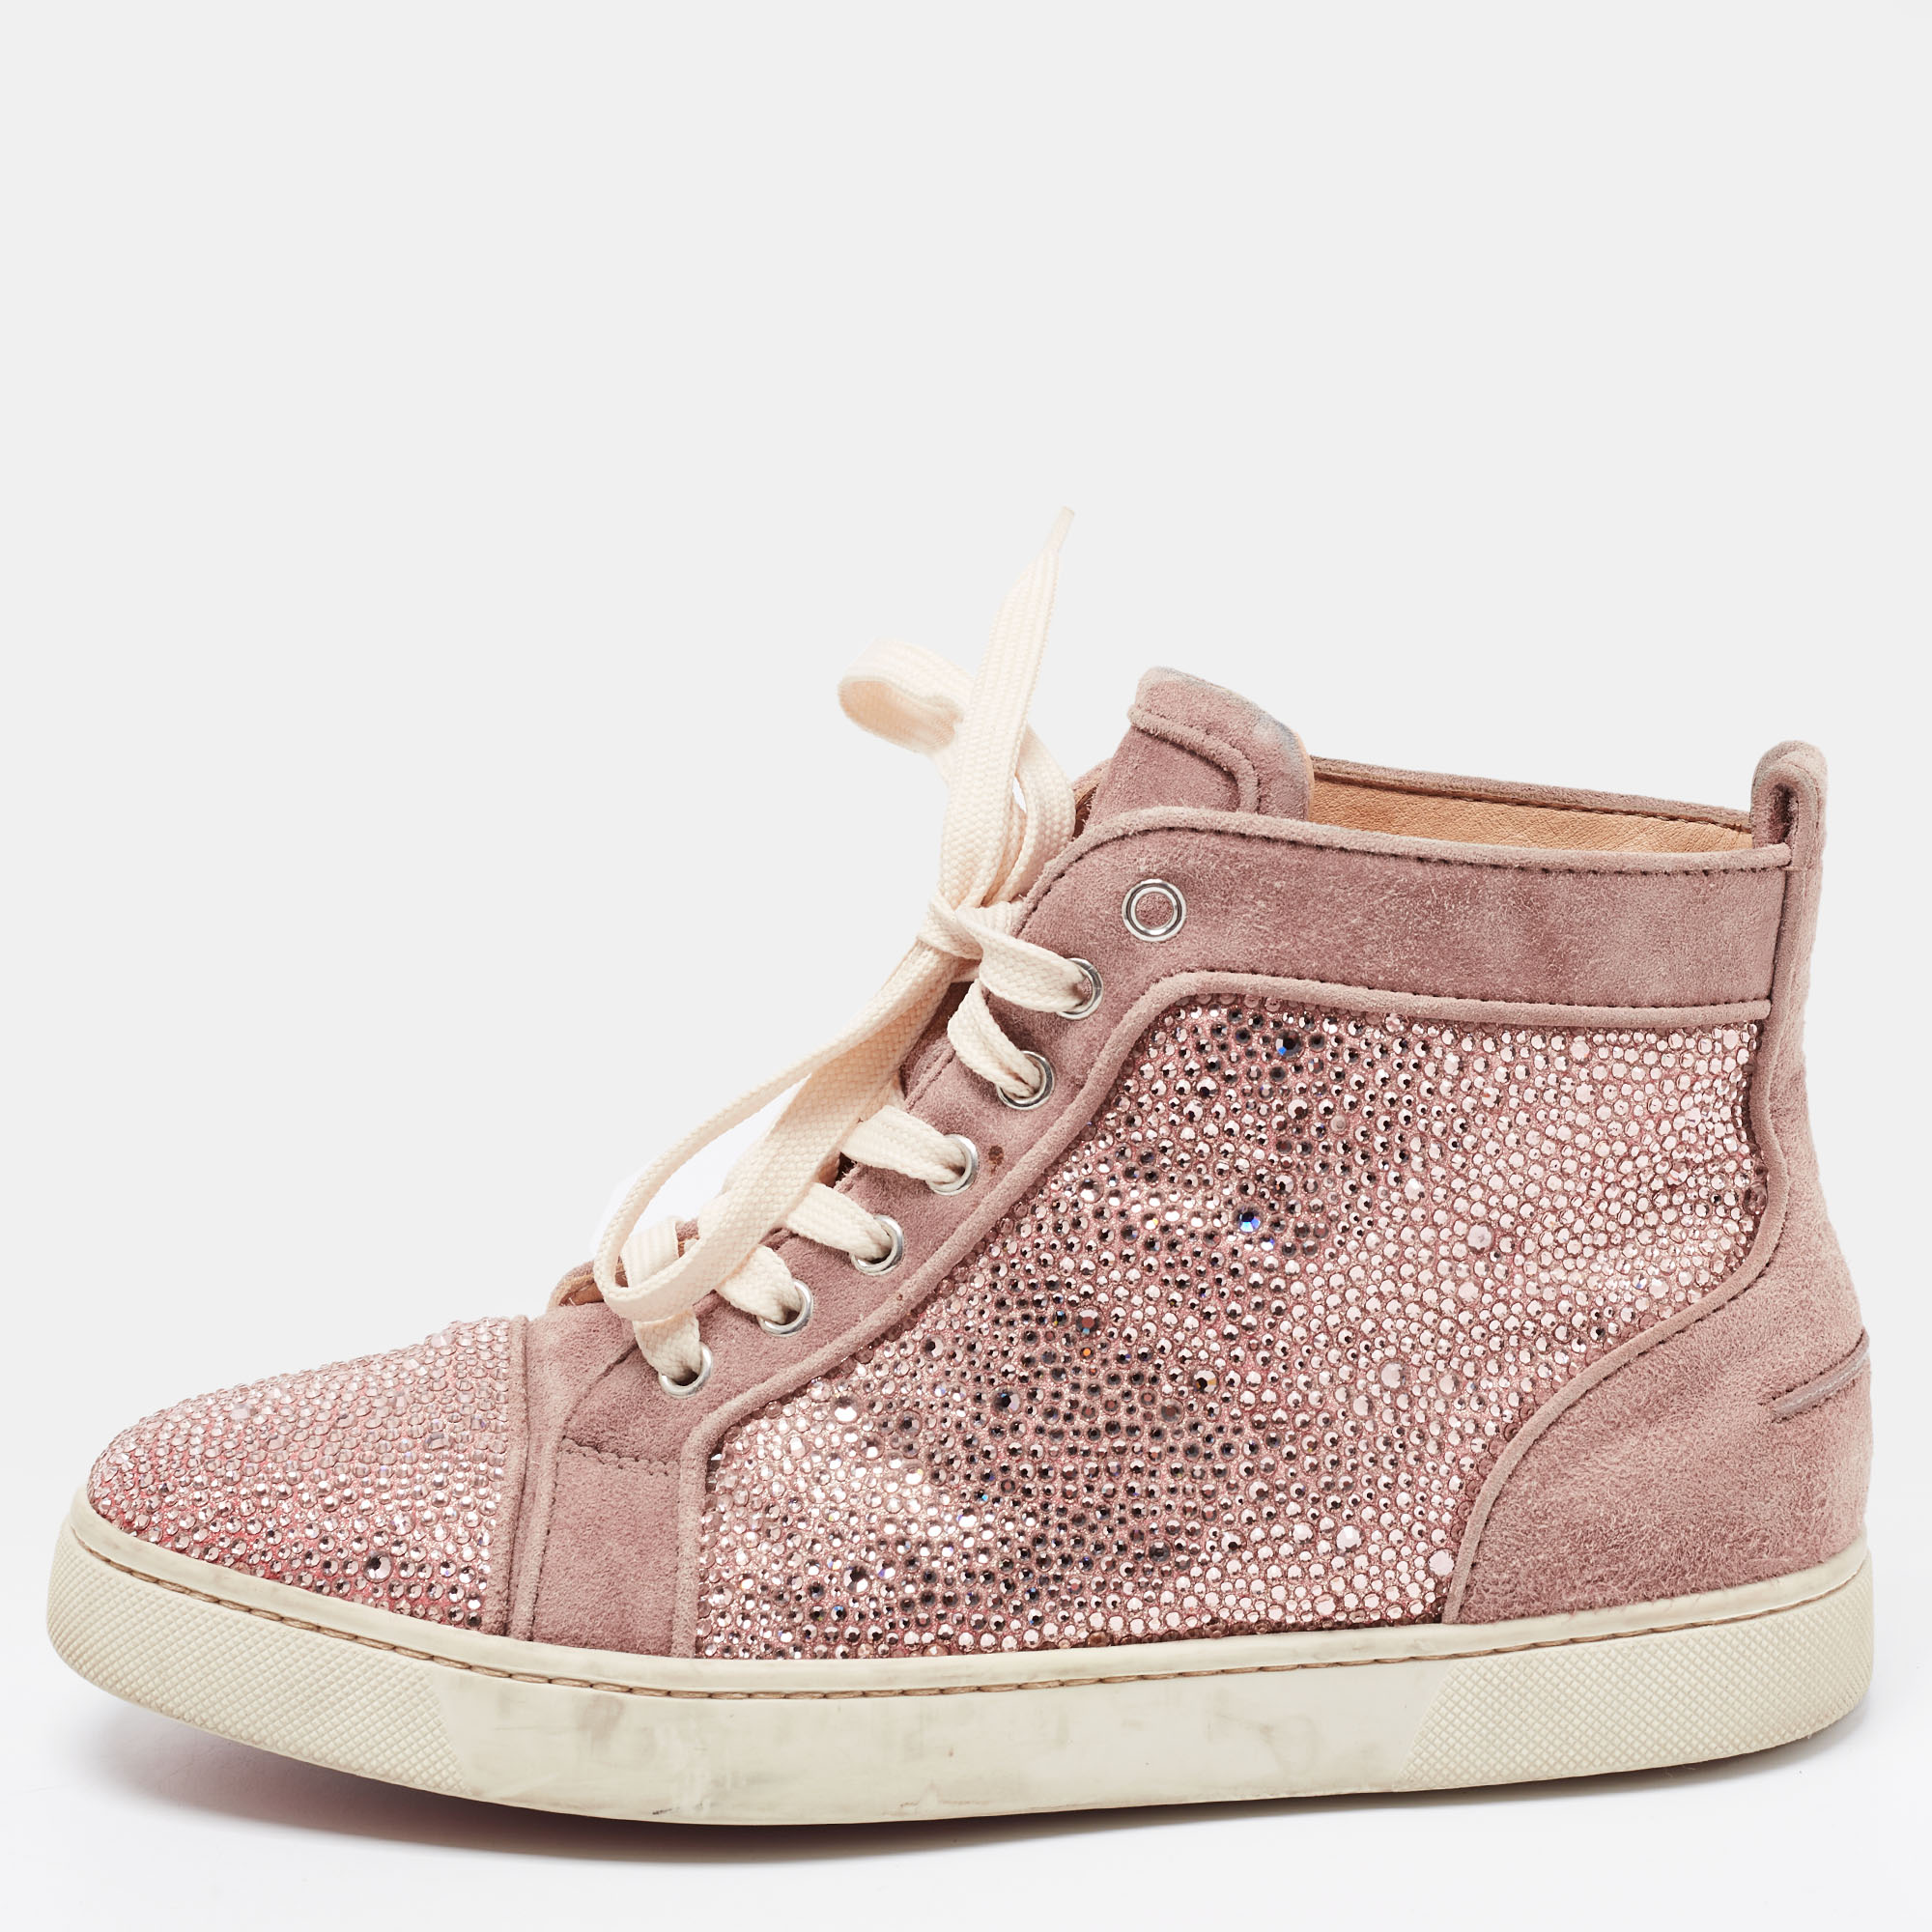 Pre-owned Christian Louboutin Pink Suede Louis Flat Strass High-top Trainers Size 40